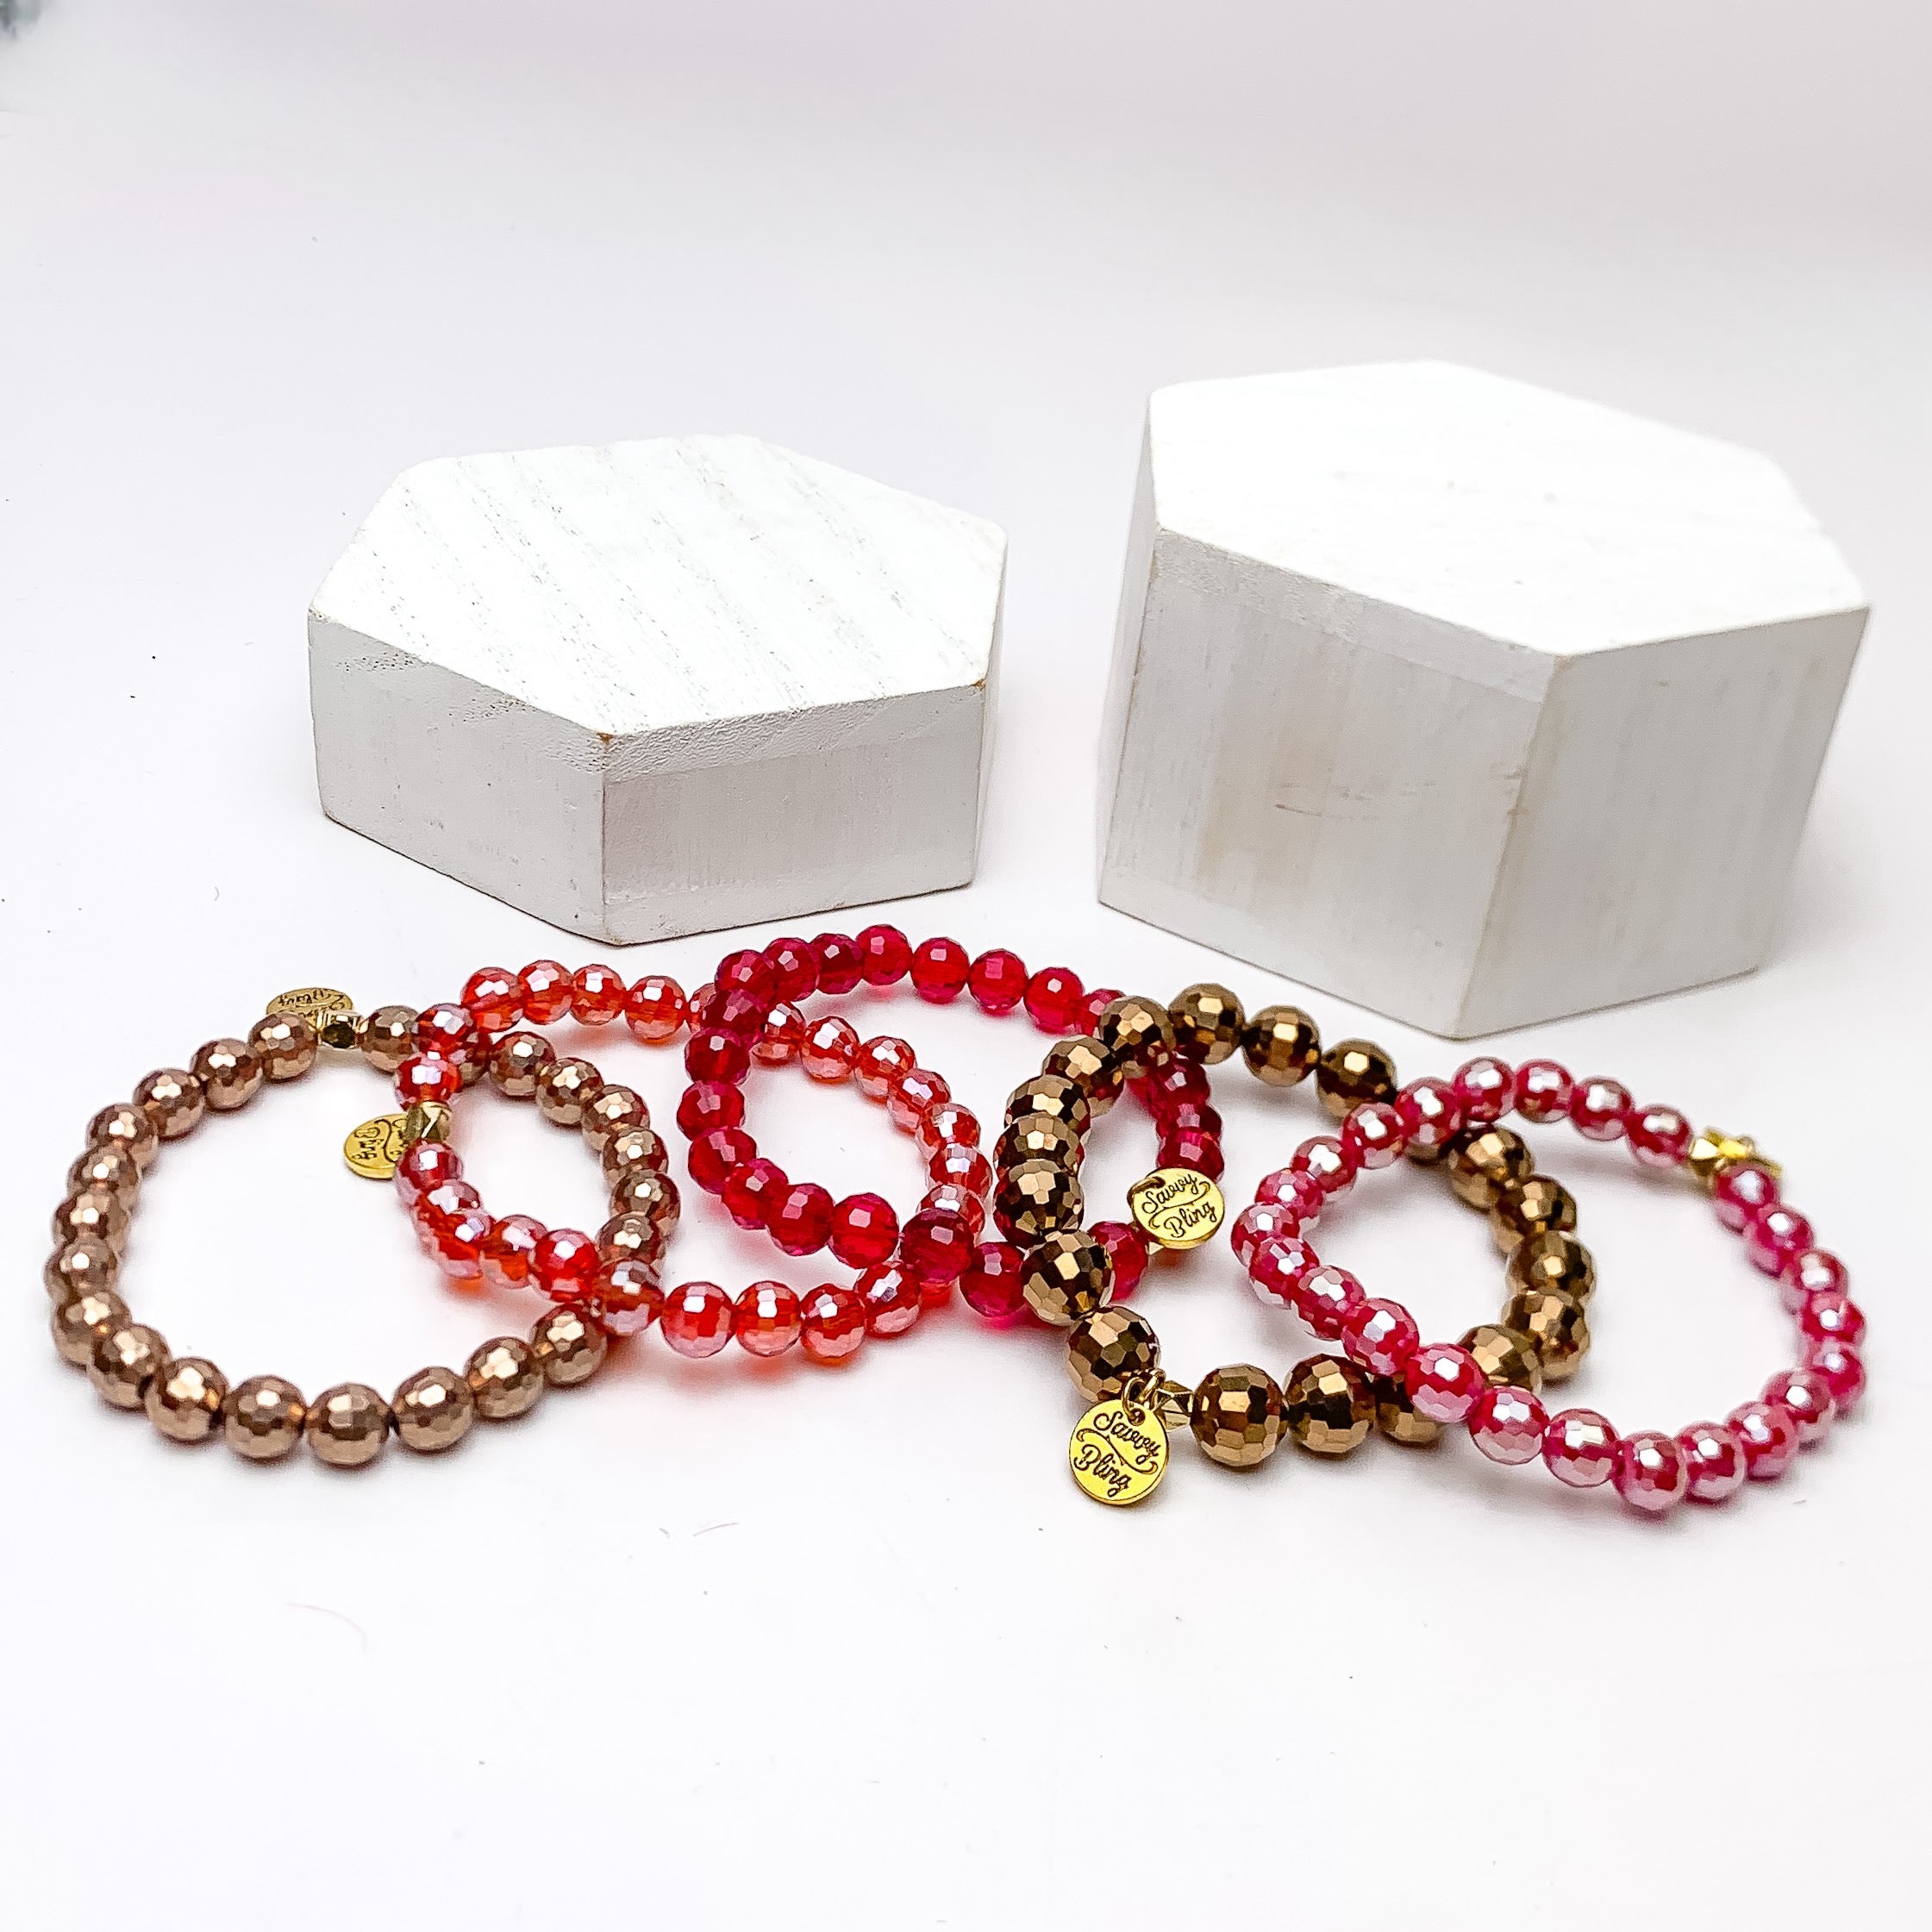 Set of Five | All Nighter Crystal Beaded Bracelet Set in Sunkissed Tones. These bracelets are pictured on a white background with two white podiums behind them.